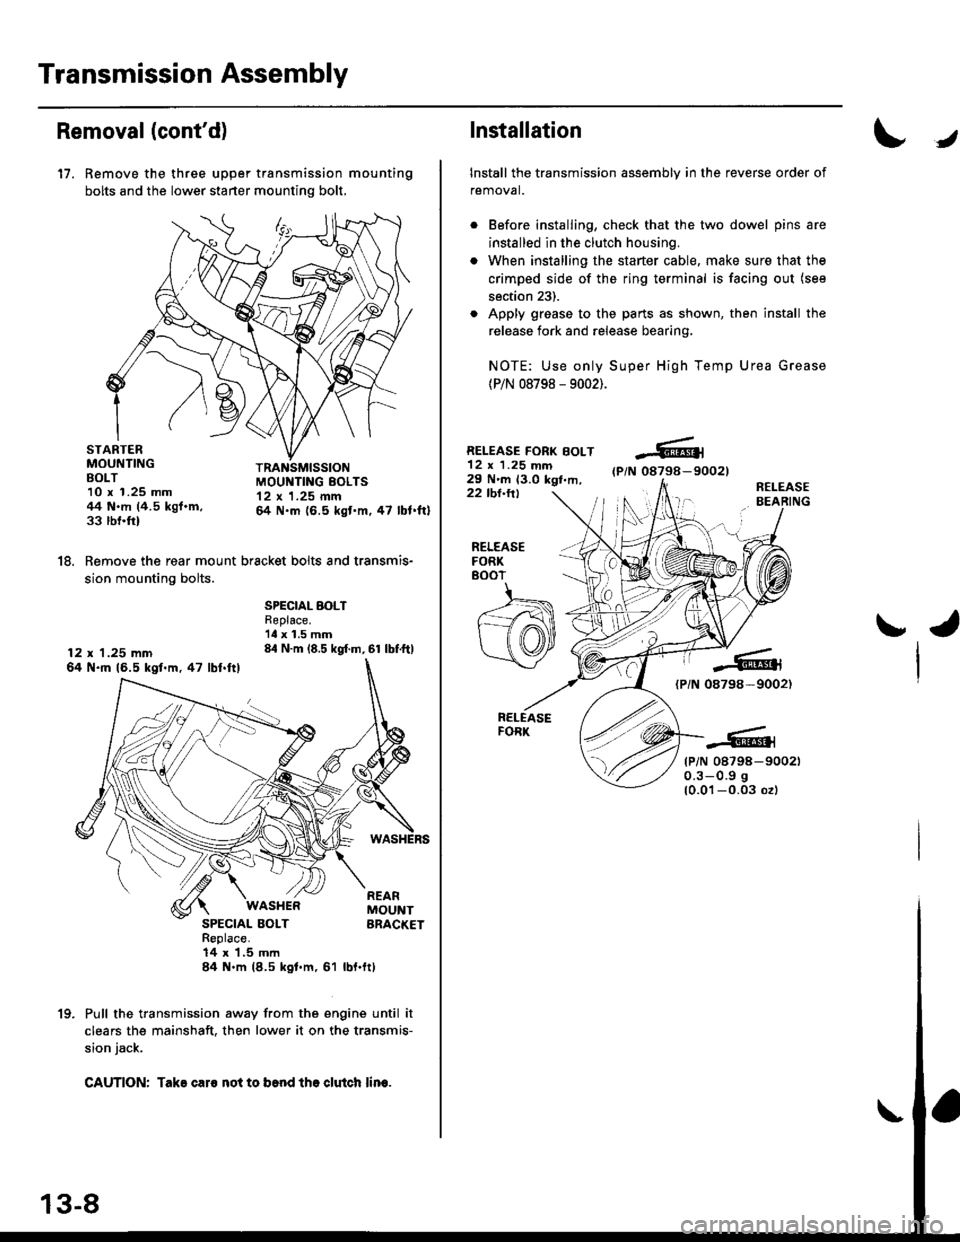 HONDA CIVIC 1996 6.G Service Manual Transmission Assembly
Removal(contd)
17. Remove the three upper transmission mounting
bolts and the lower starter mounting bolt,
STARTERMOUNTINGBOLT10 x 1.25 mm44 N.m (4.5 kgf.m,33 rbnftl
TRANSMISSIO